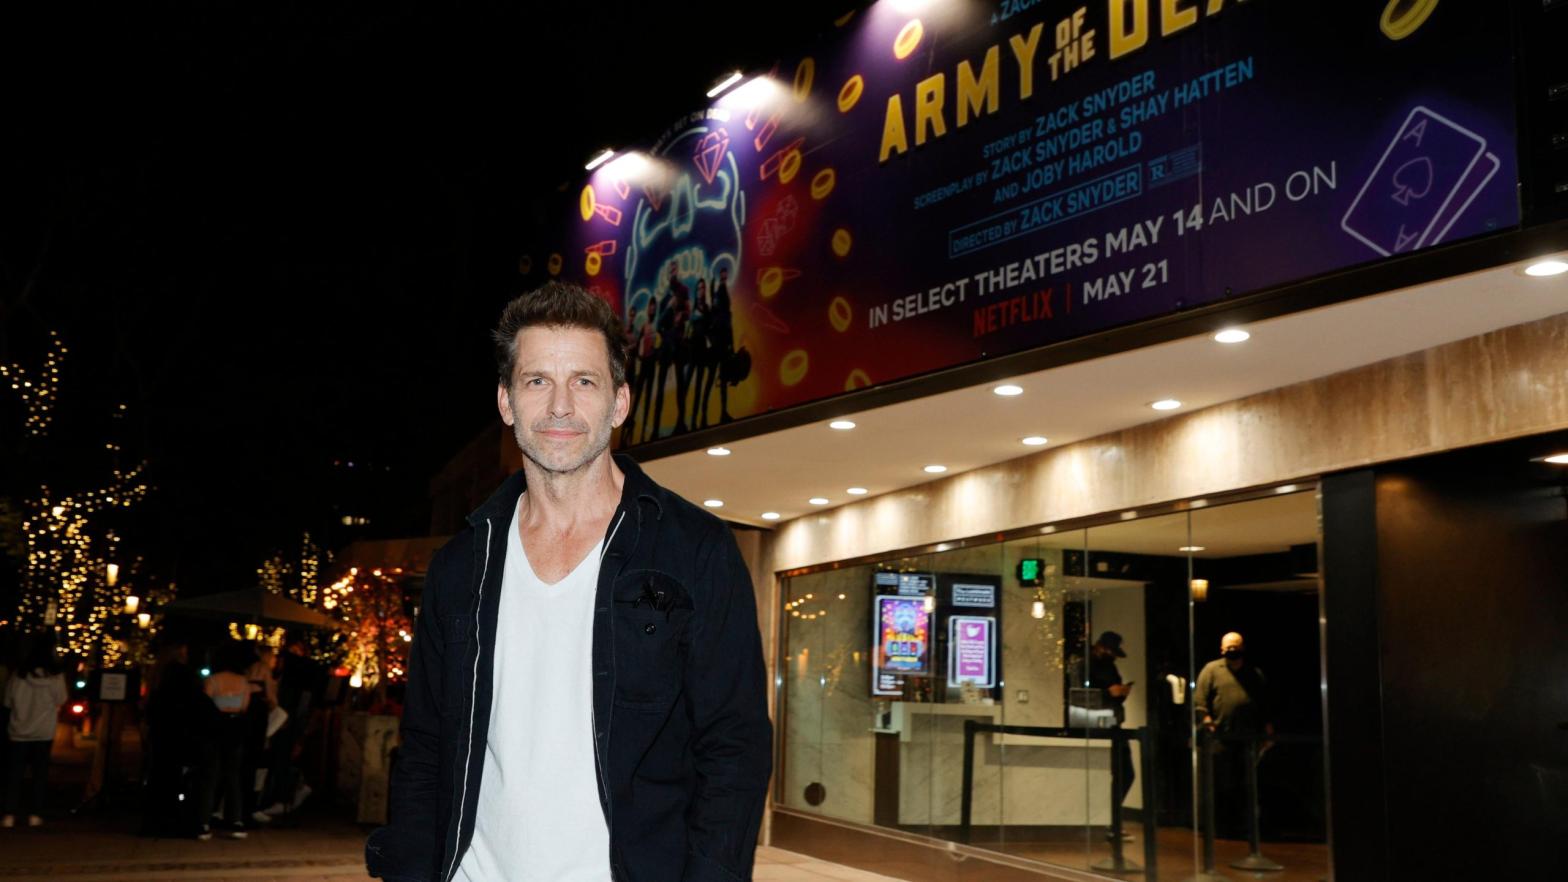 Zack Snyder at the May 14, 2021 premiere of Army of the Dead in Los Angeles, California. (Photo: Amy Sussman, Getty Images)